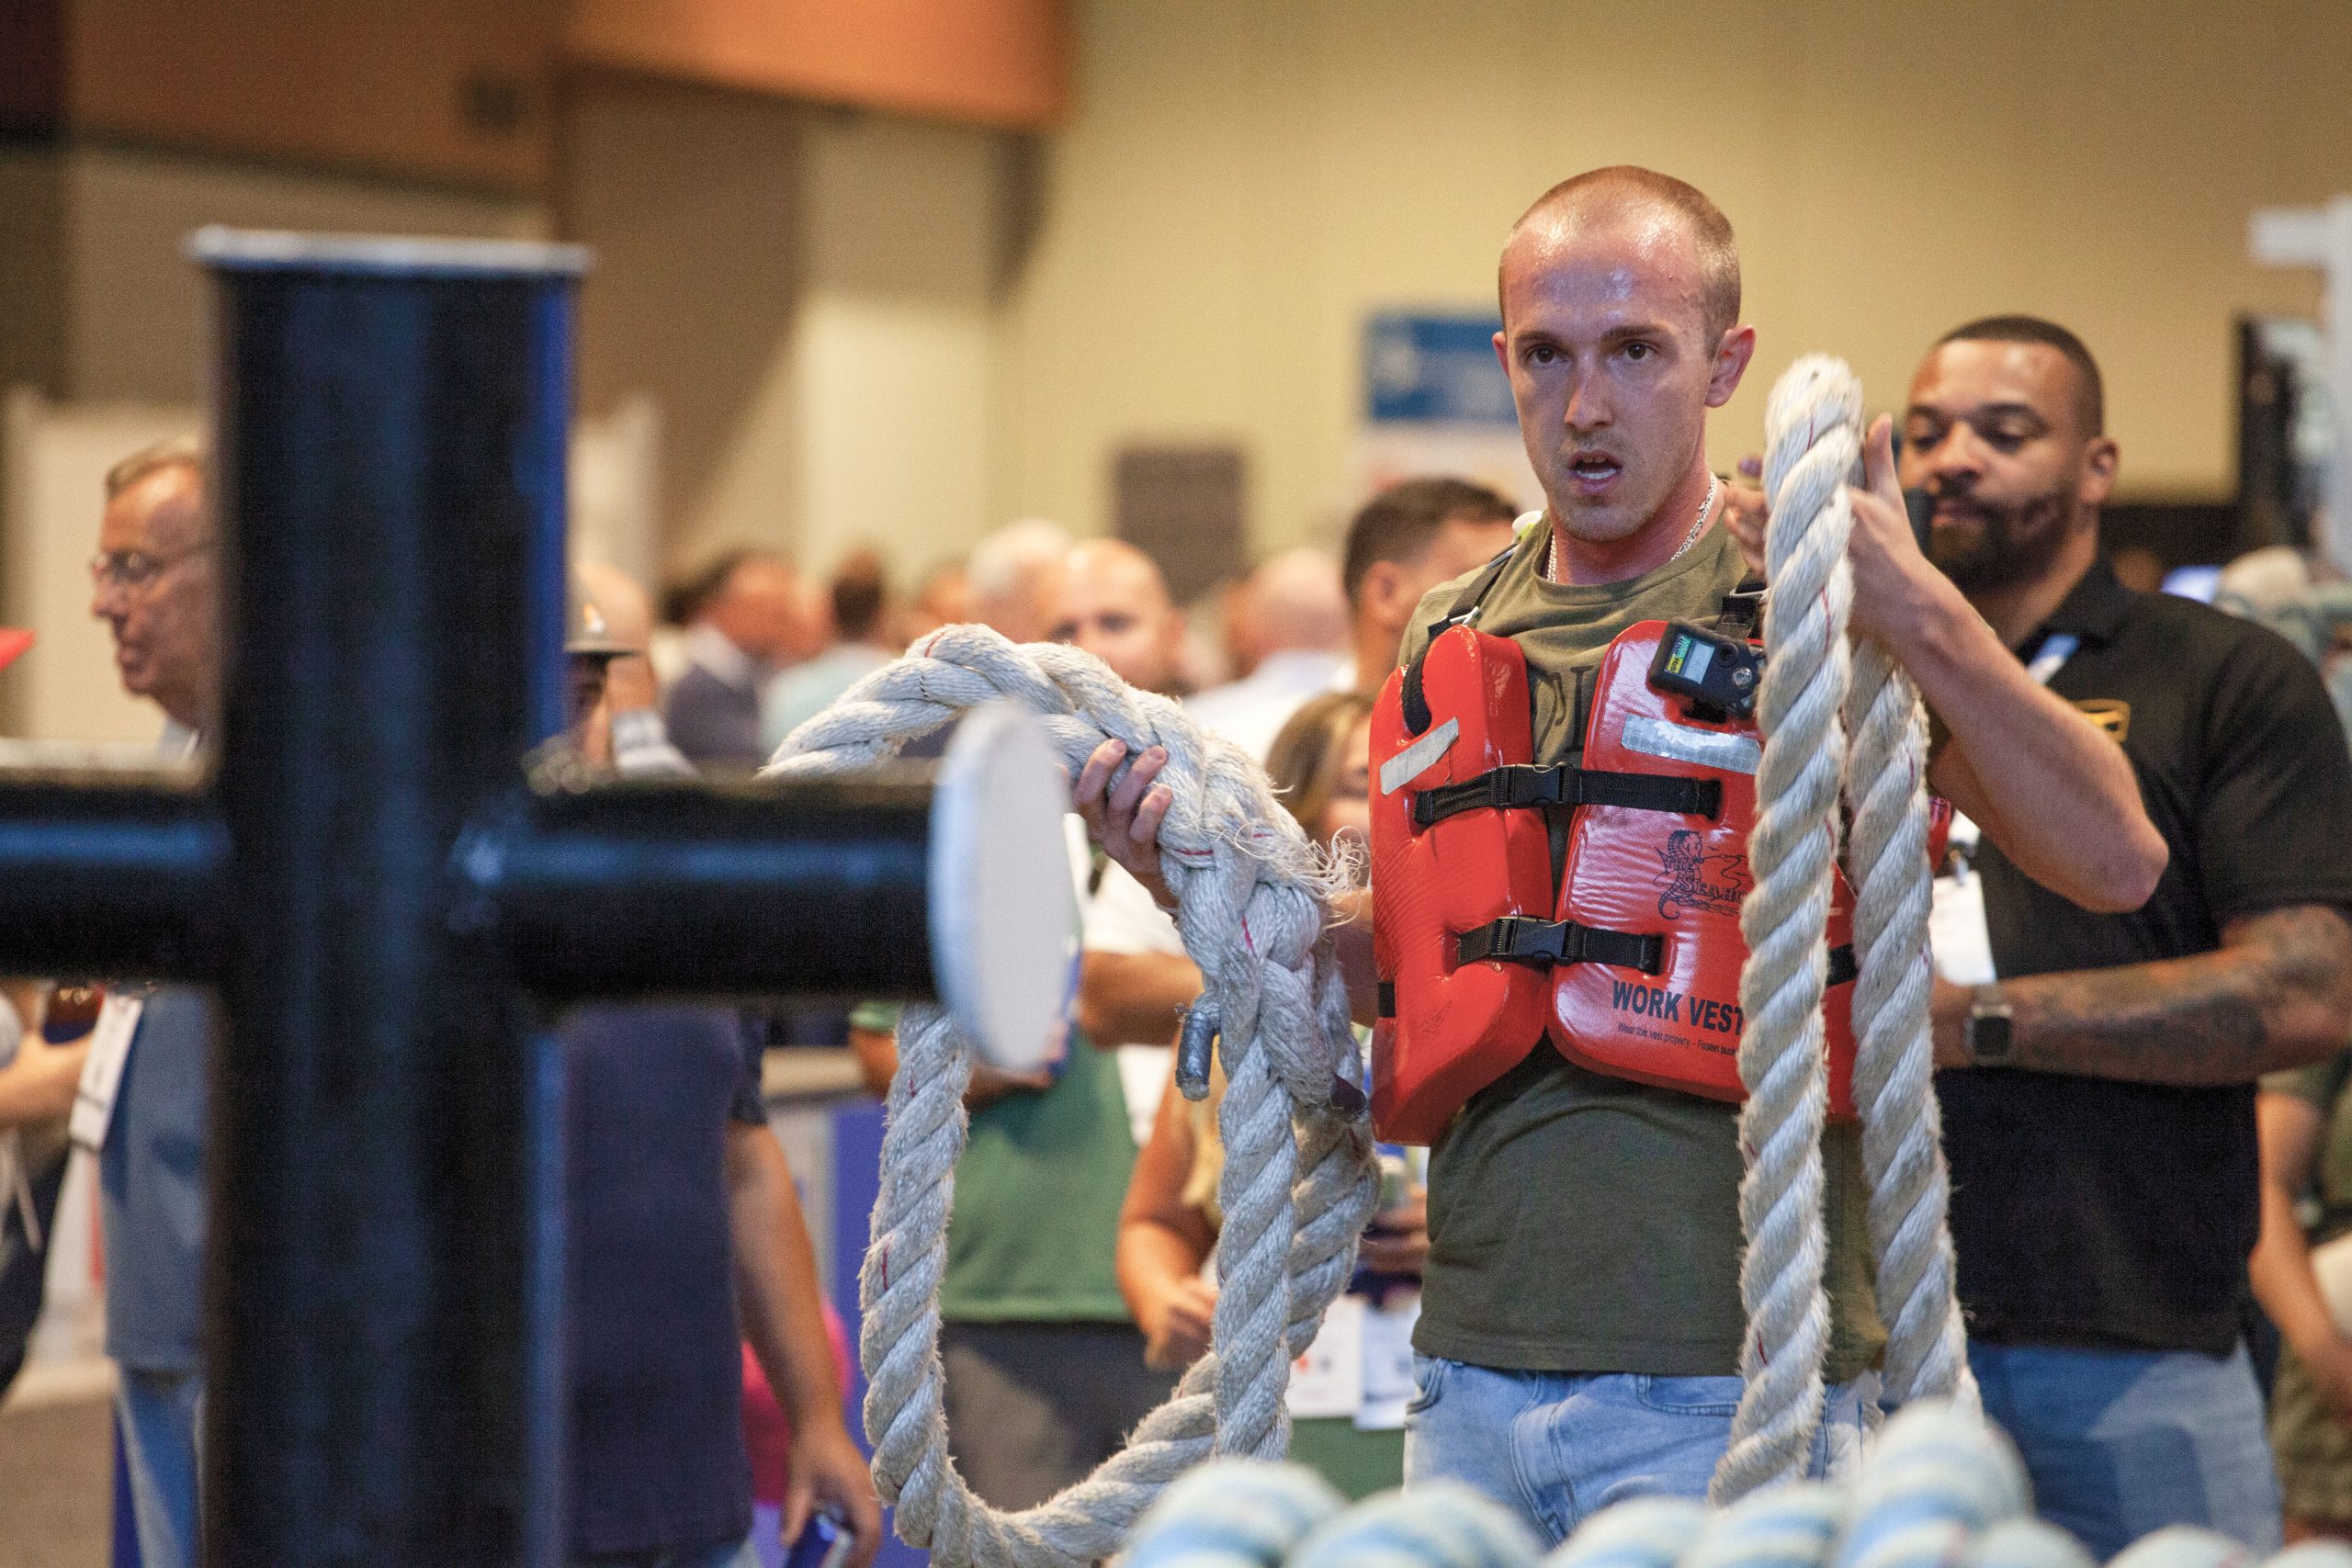 Leighton Loveless, a steersman with Central Boat Rentals, prepares to throw a line at the Maritime Throwdown final at IMX. Loveless came in first place. (Photosby Frank McCormack)